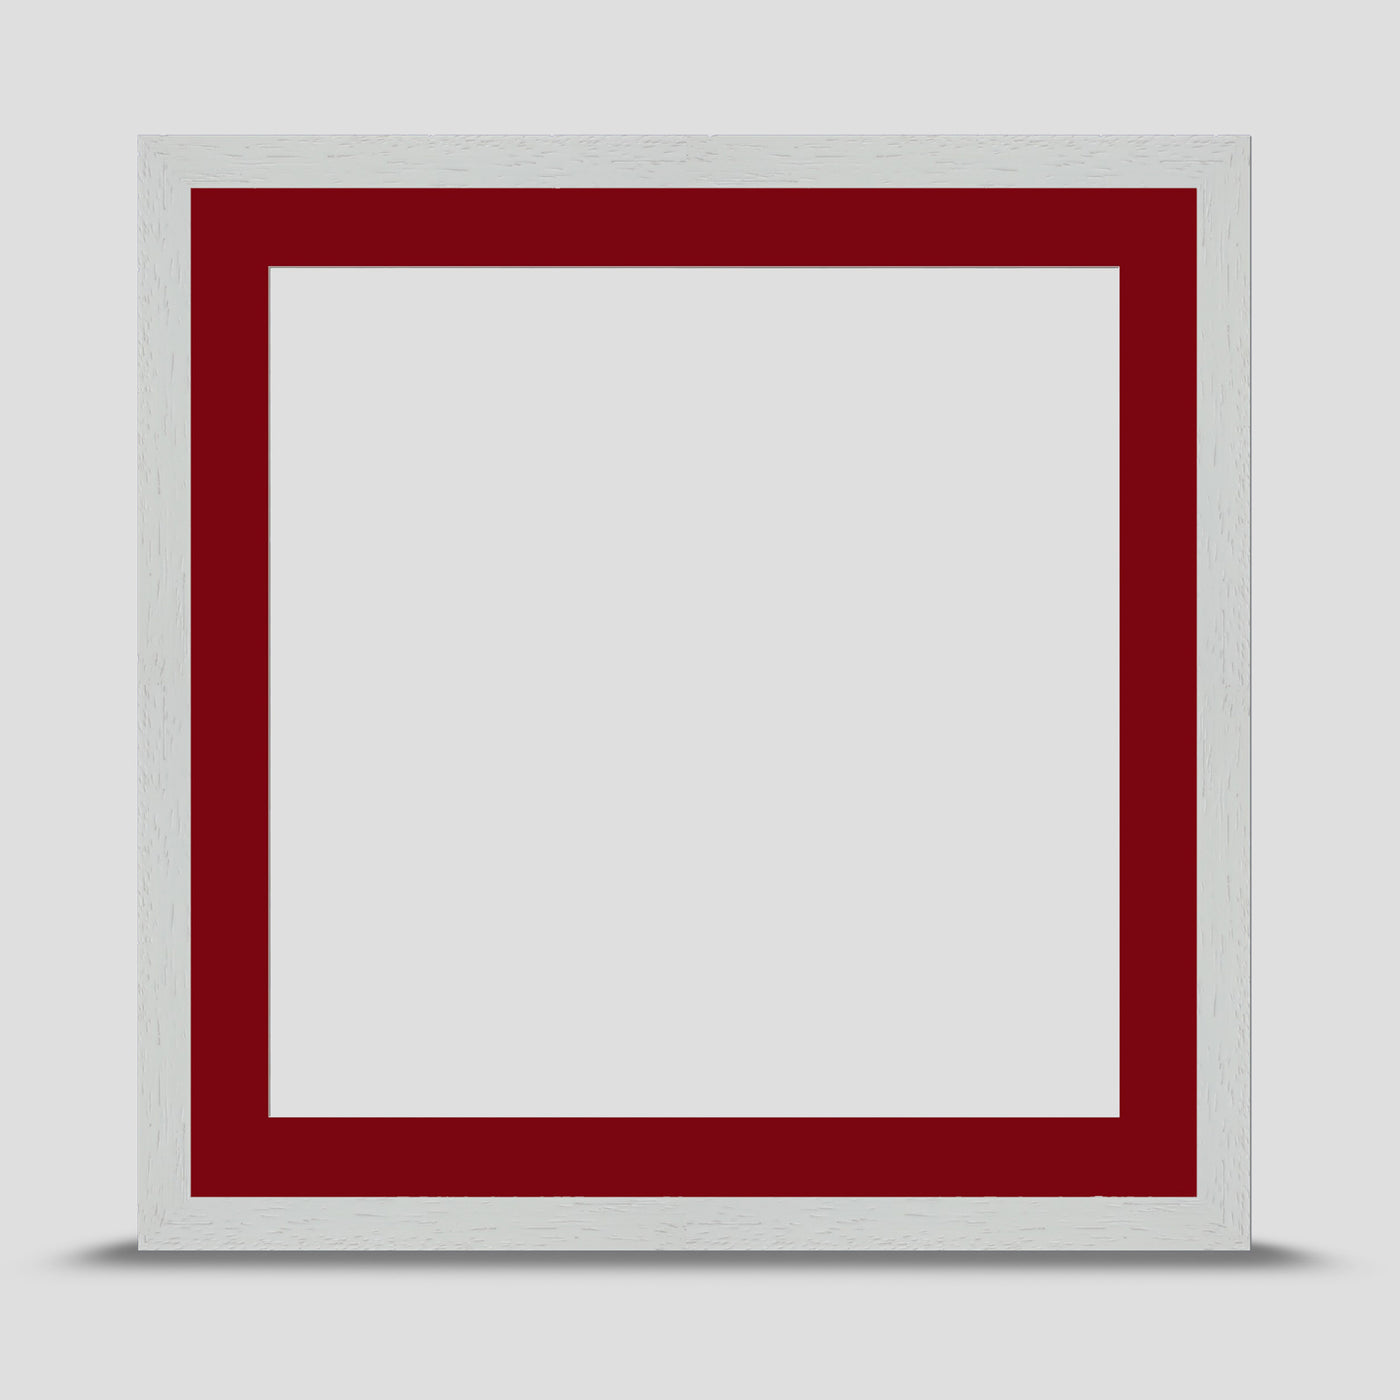 12x12 Classic White Picture Frame with a 10x10 Mount